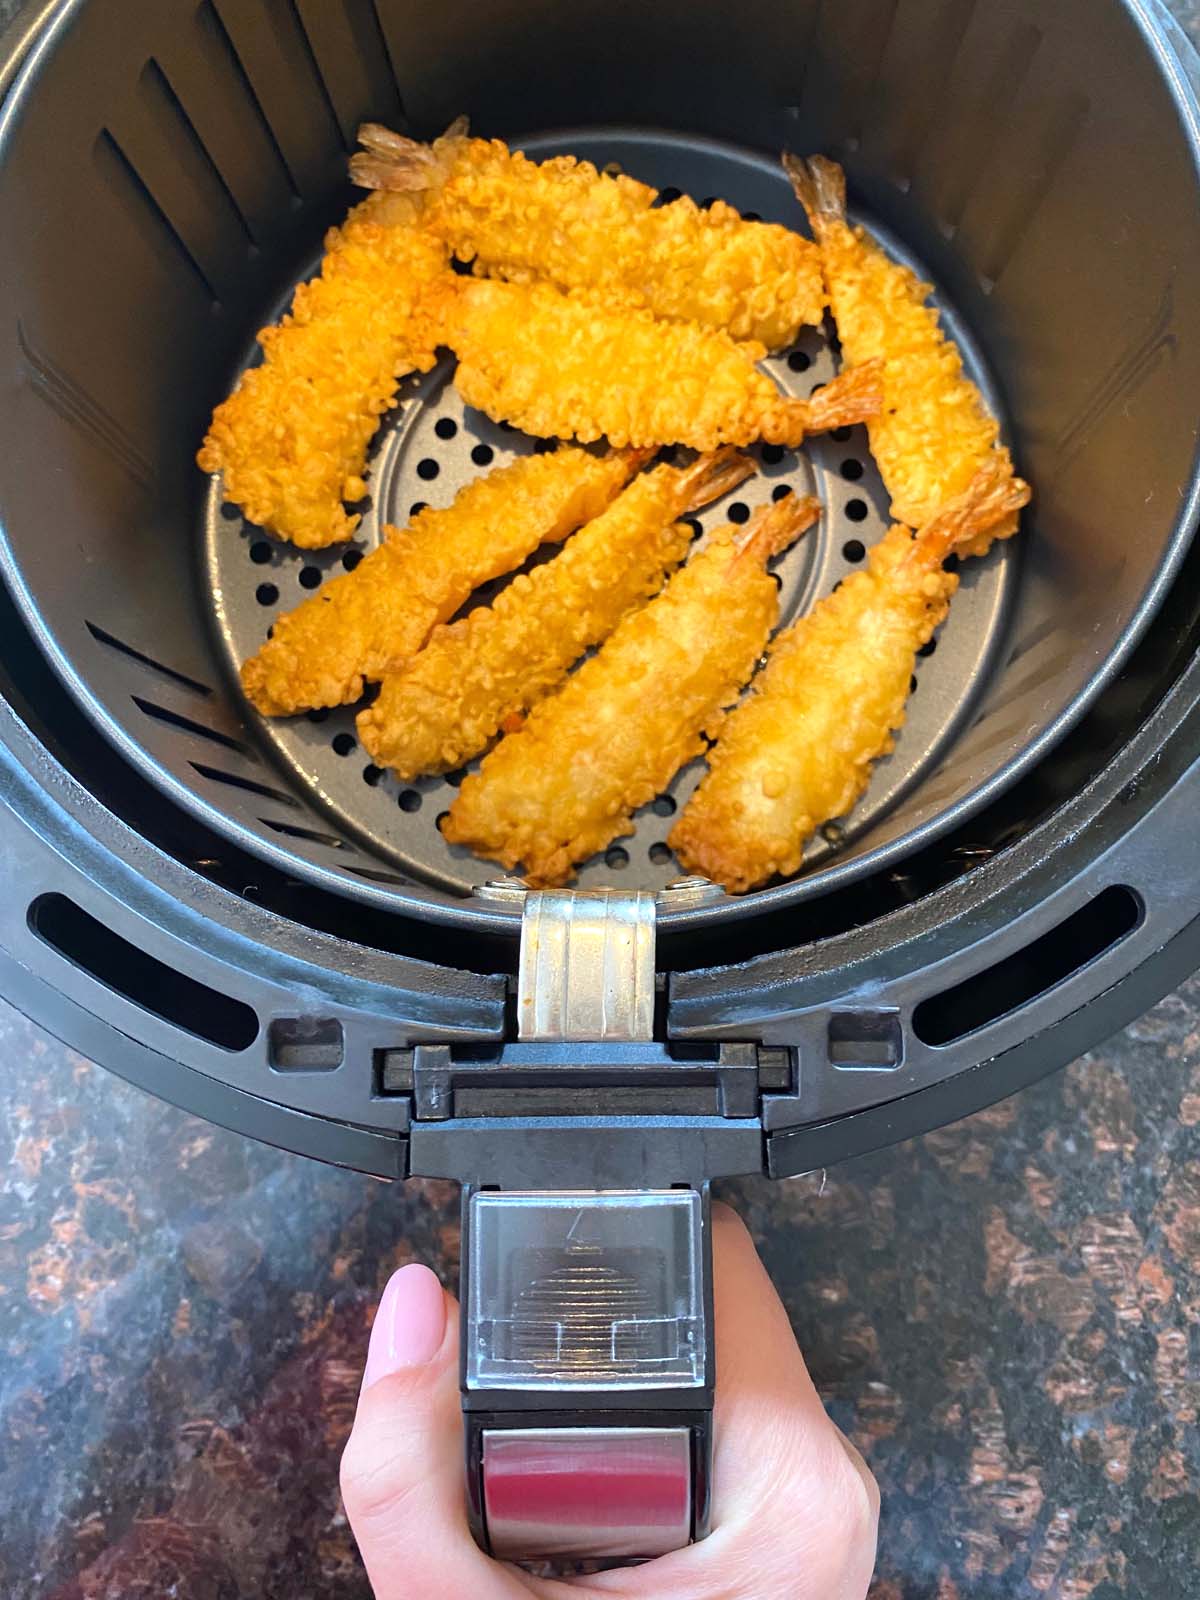 Air fryer basket being removed to show cooked crispy tempura shrimp.